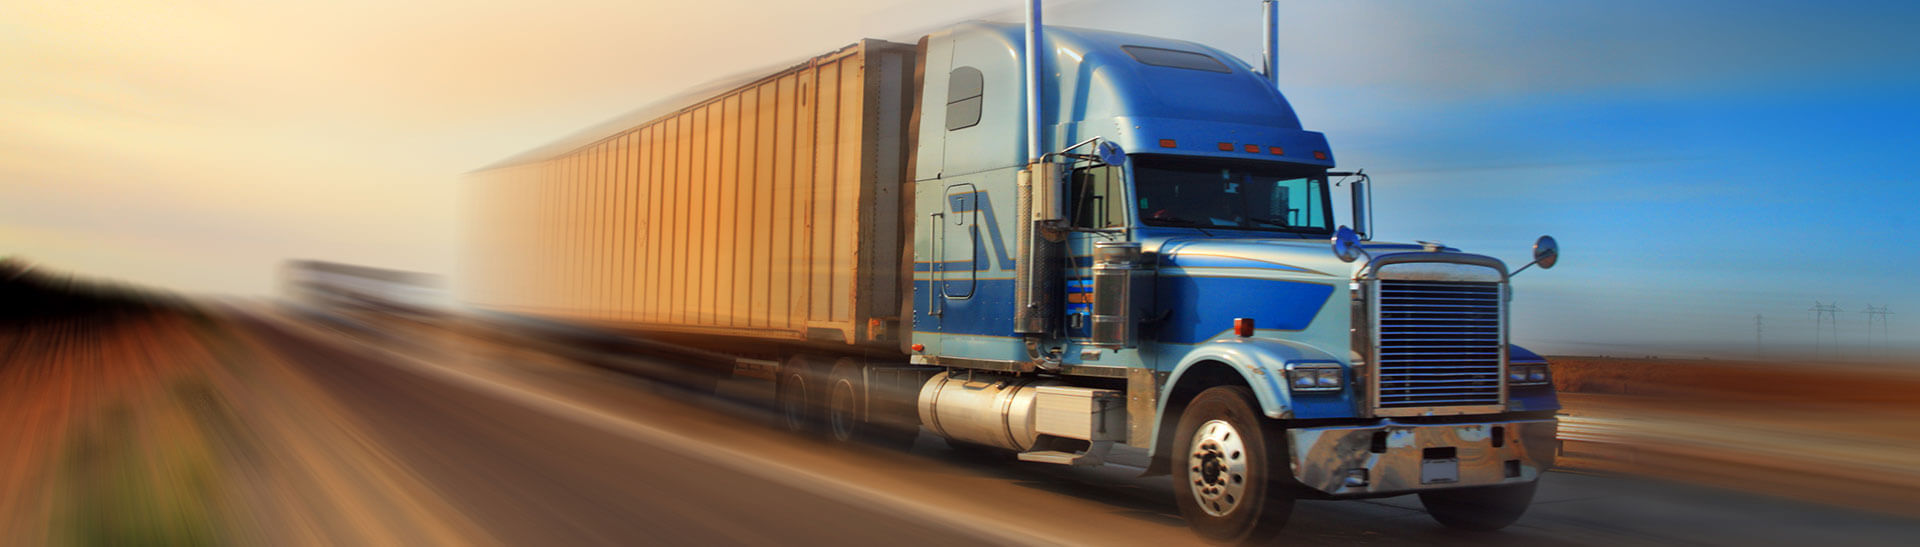 Davenport Trucking Company, Trucking Services and Logistics Services